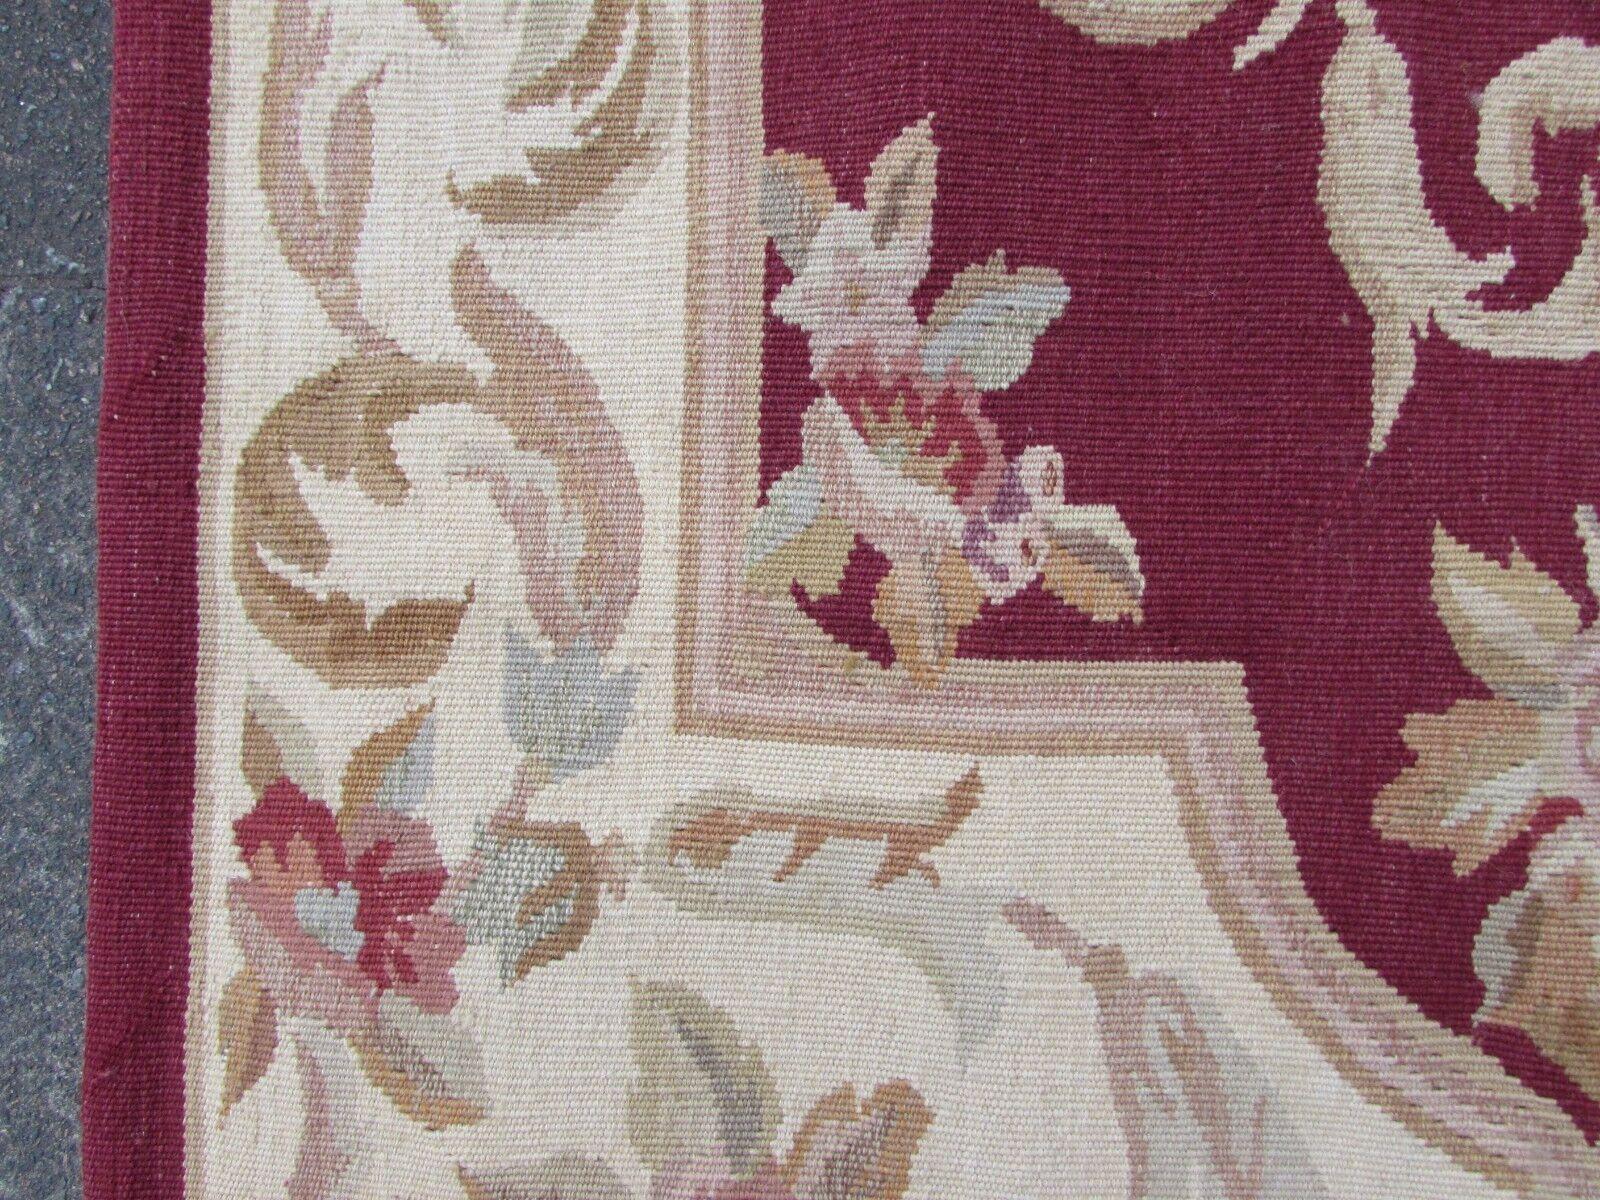 Handmade Vintage French Aubusson Rug 2.5' x 4.6', 1980s, 1Q45 For Sale 3